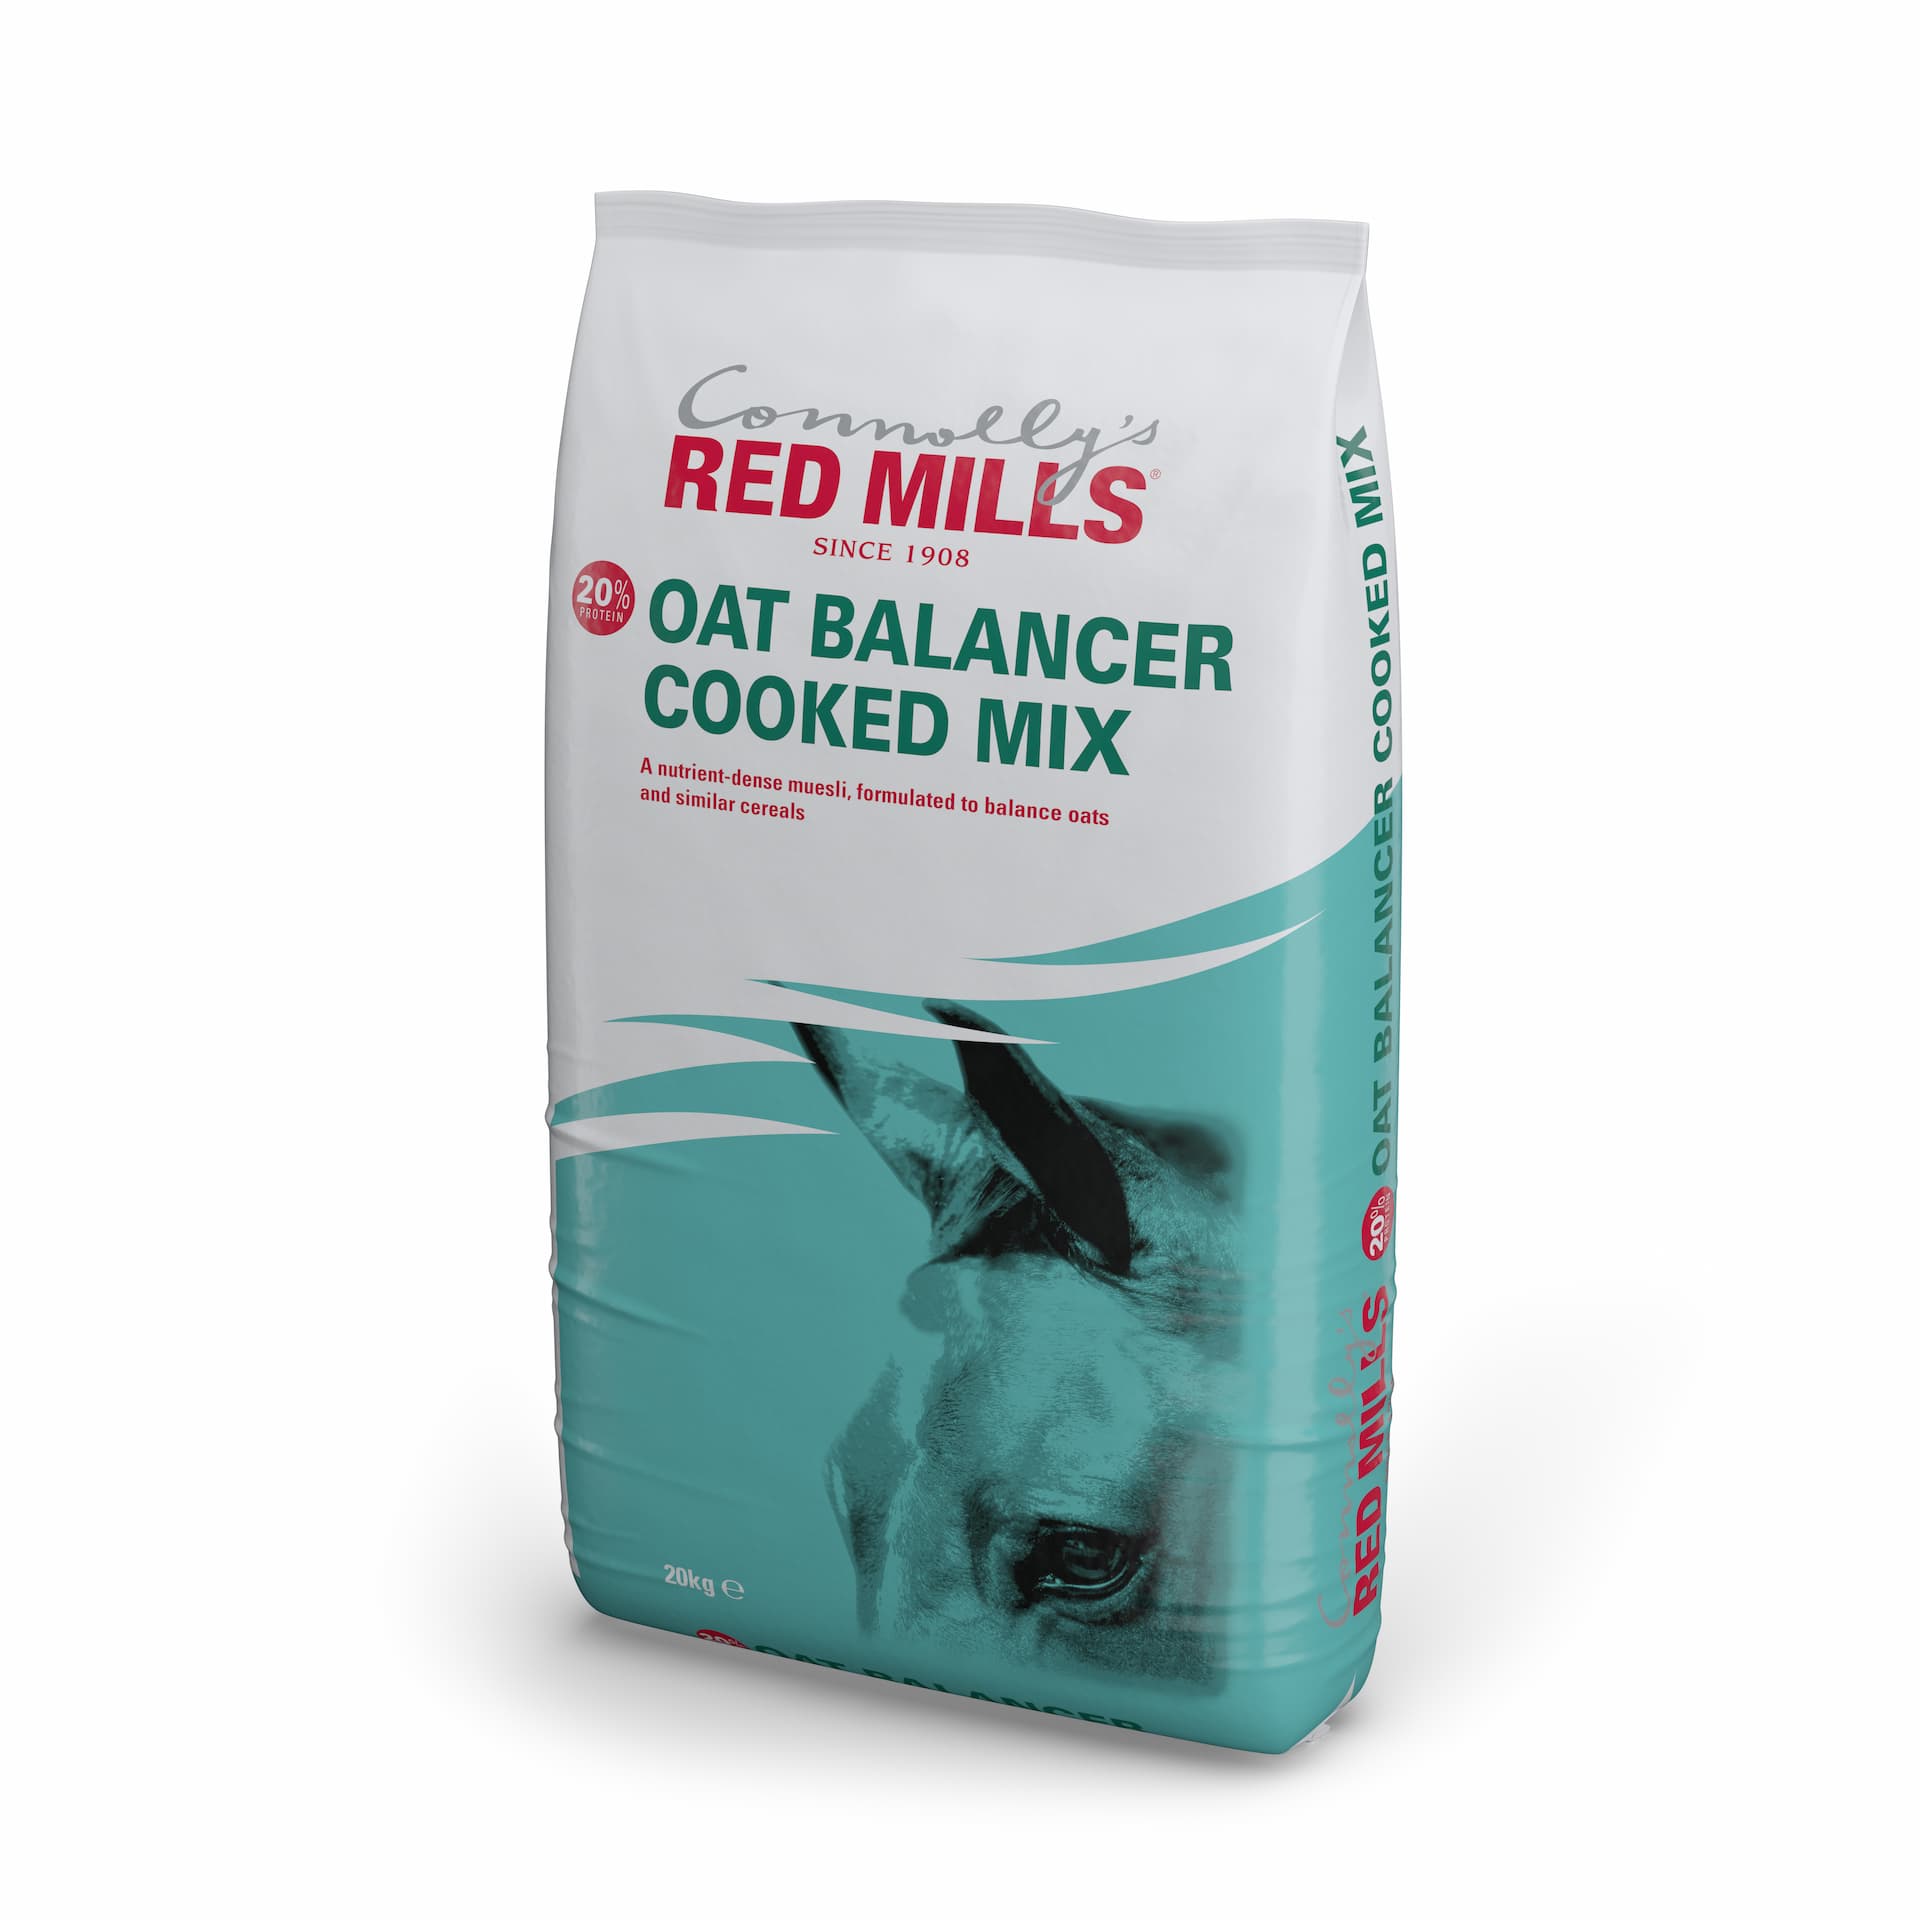 20% Oat Balancer Cooked Mix